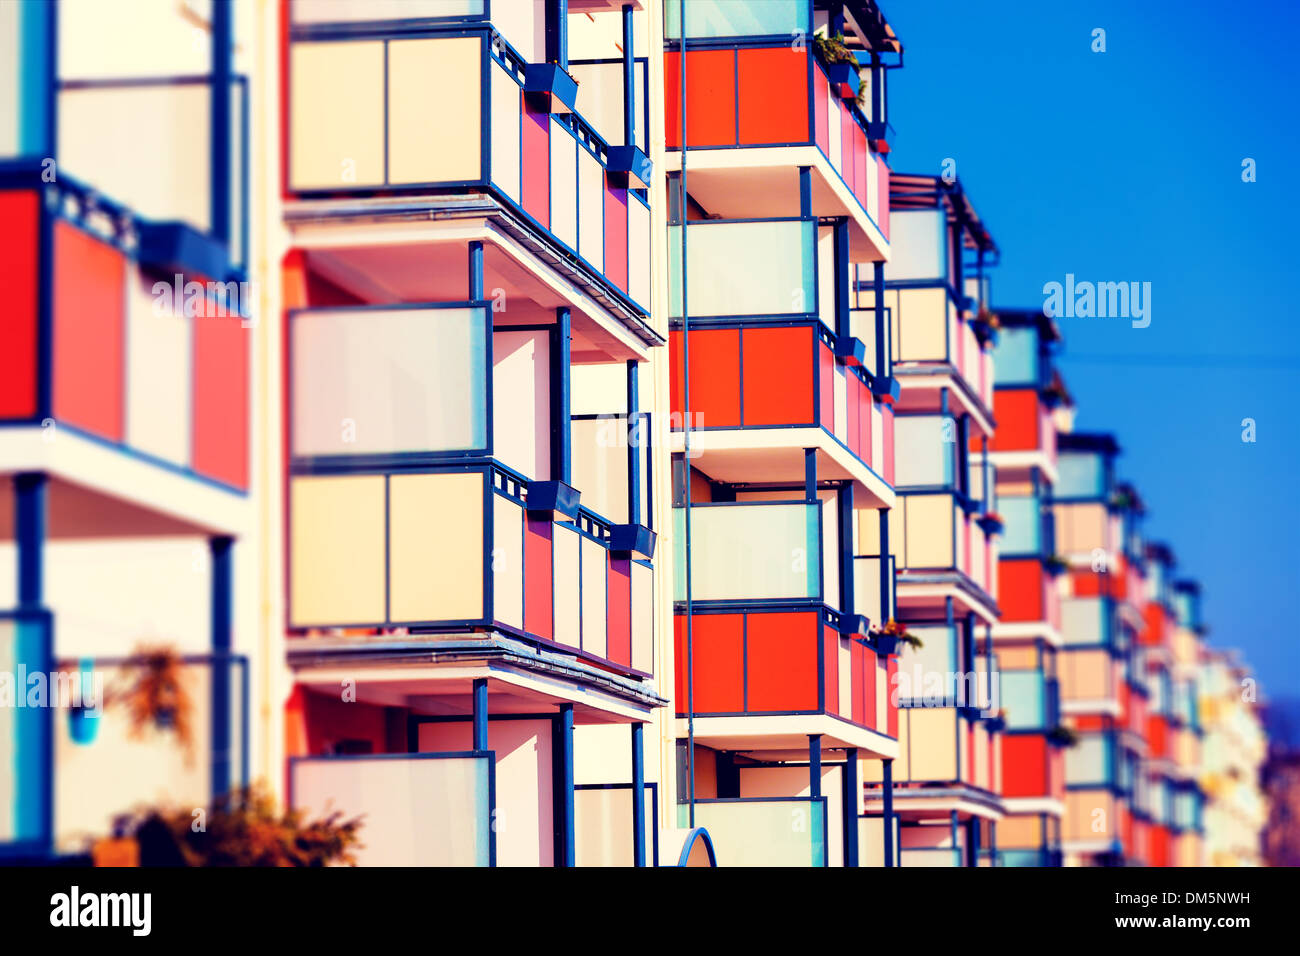 building with balconies Stock Photo